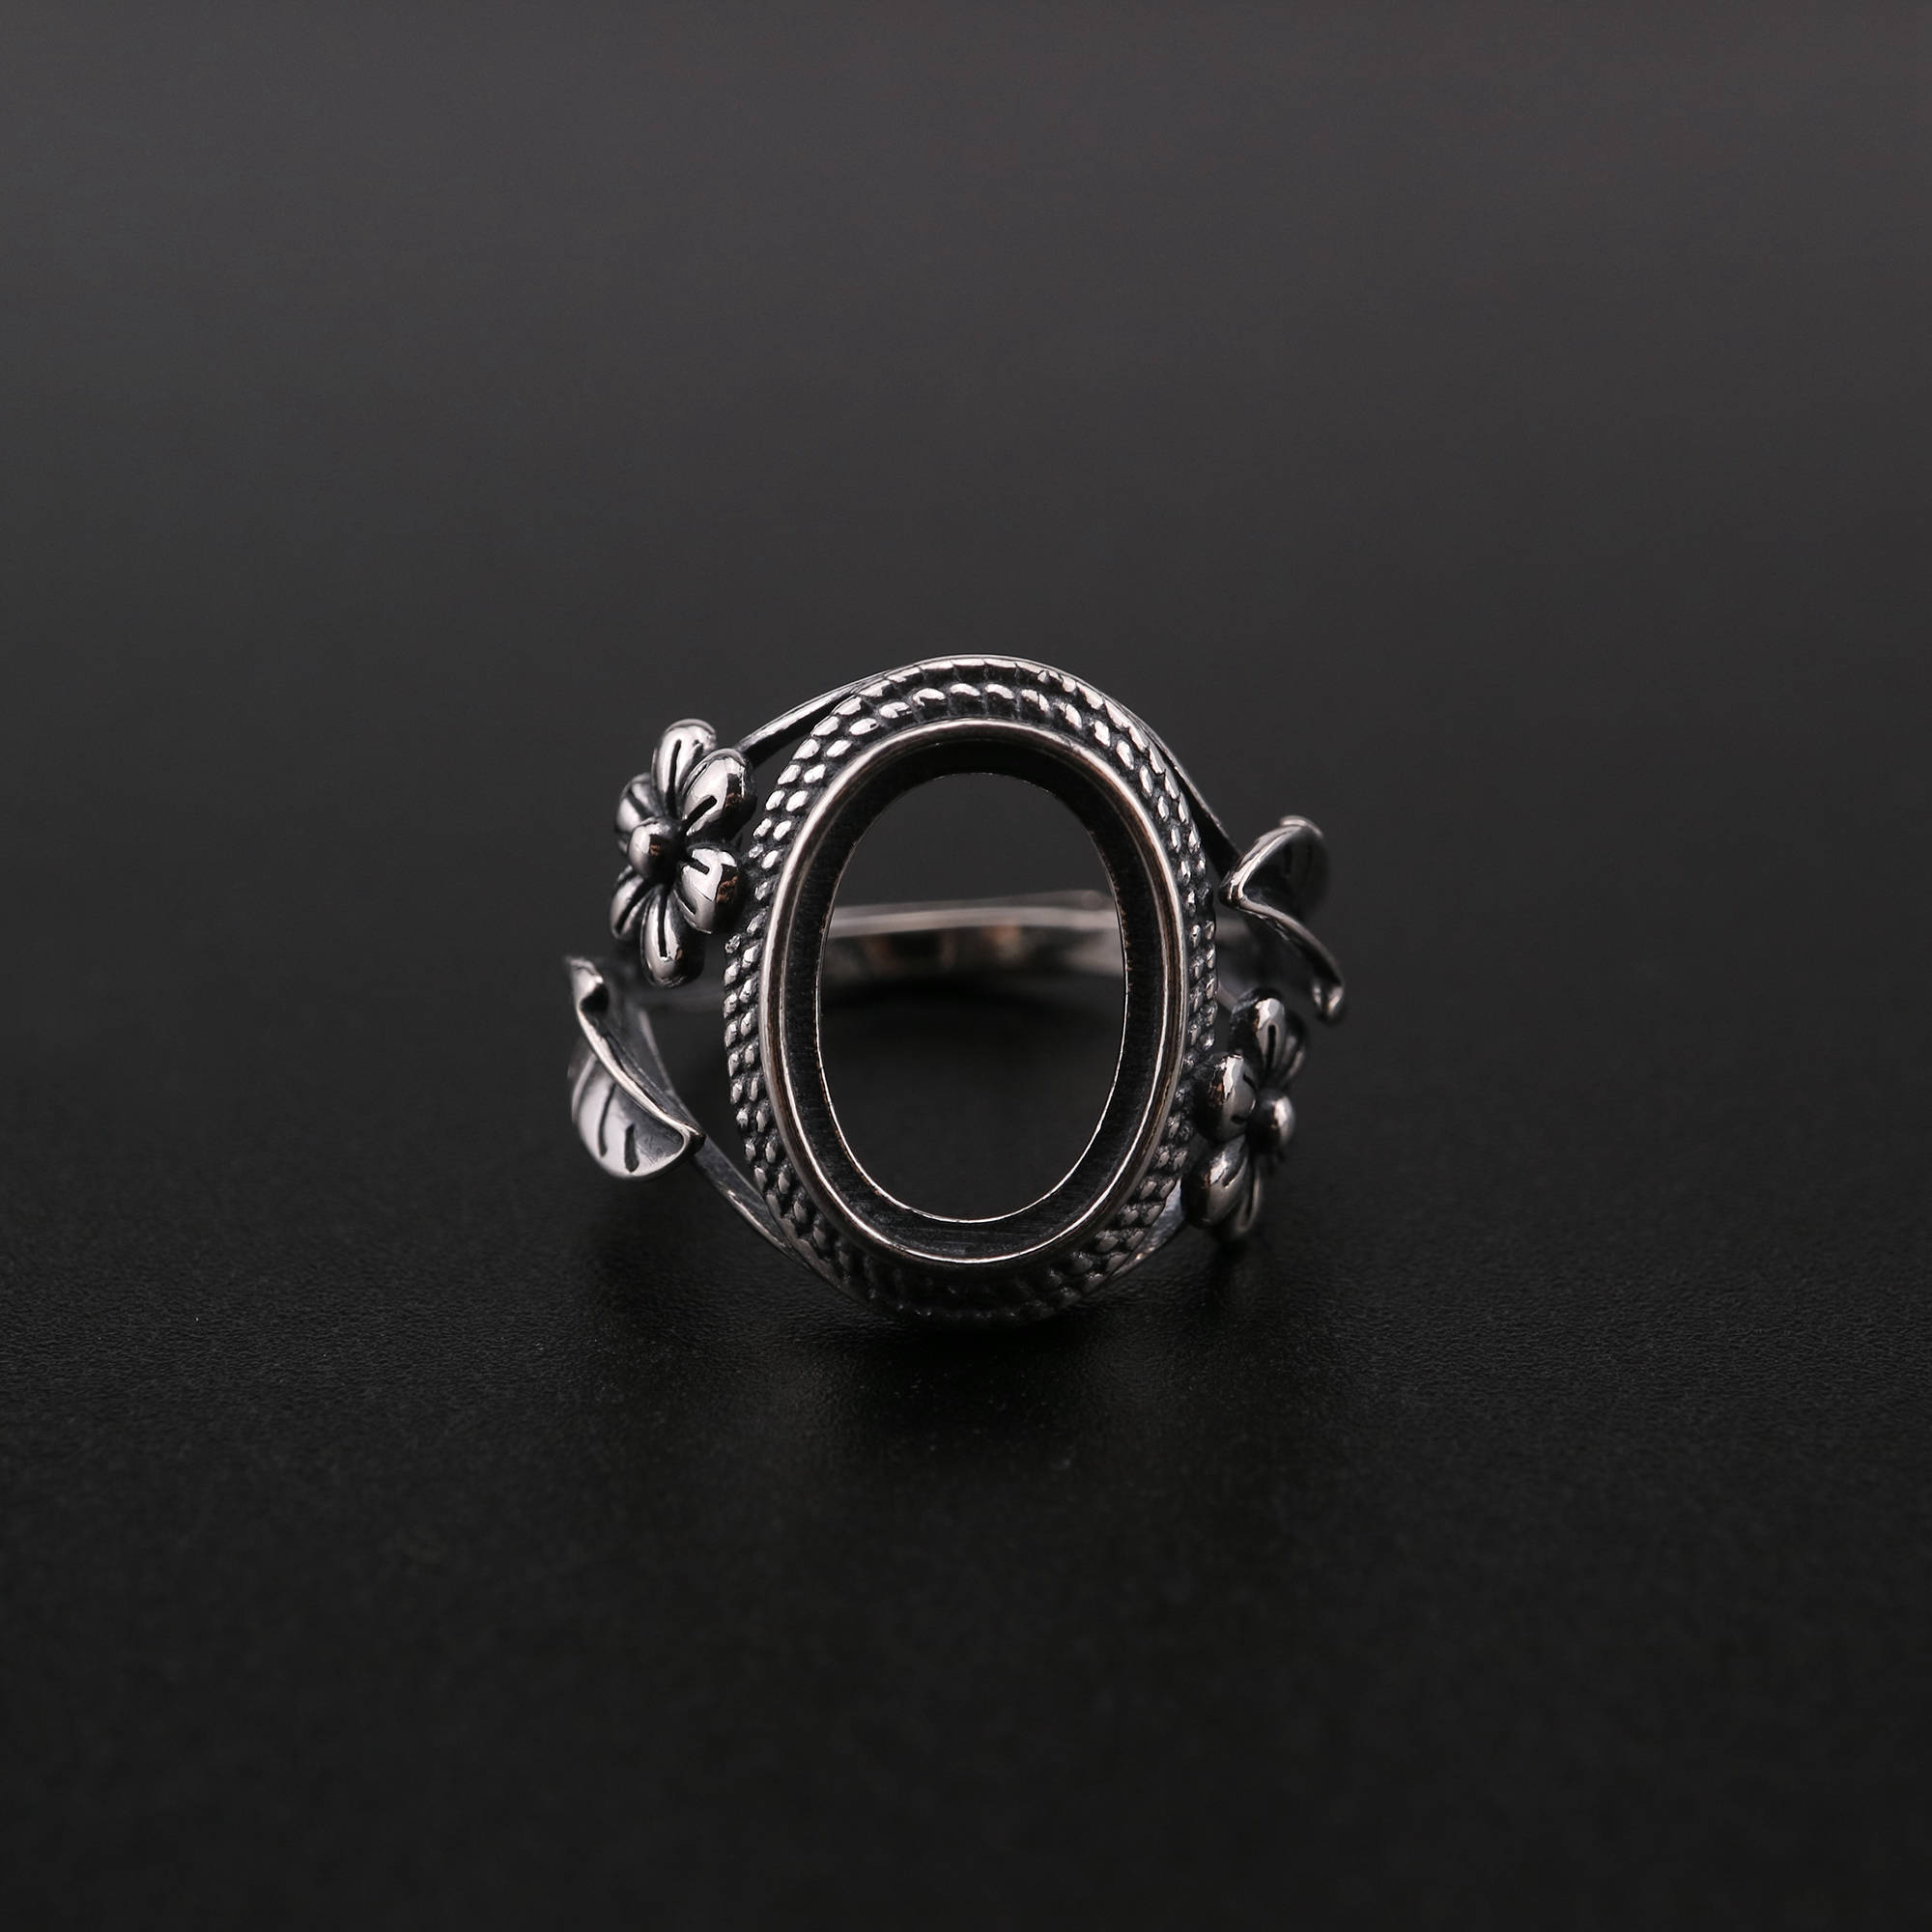 1Pcs 10x14MM Vintage Style Antiqued Solid 925 Sterling Silver Oval Bezel Flower Adjustable Ring Settings for Cabochon Stone 1223103 - Click Image to Close